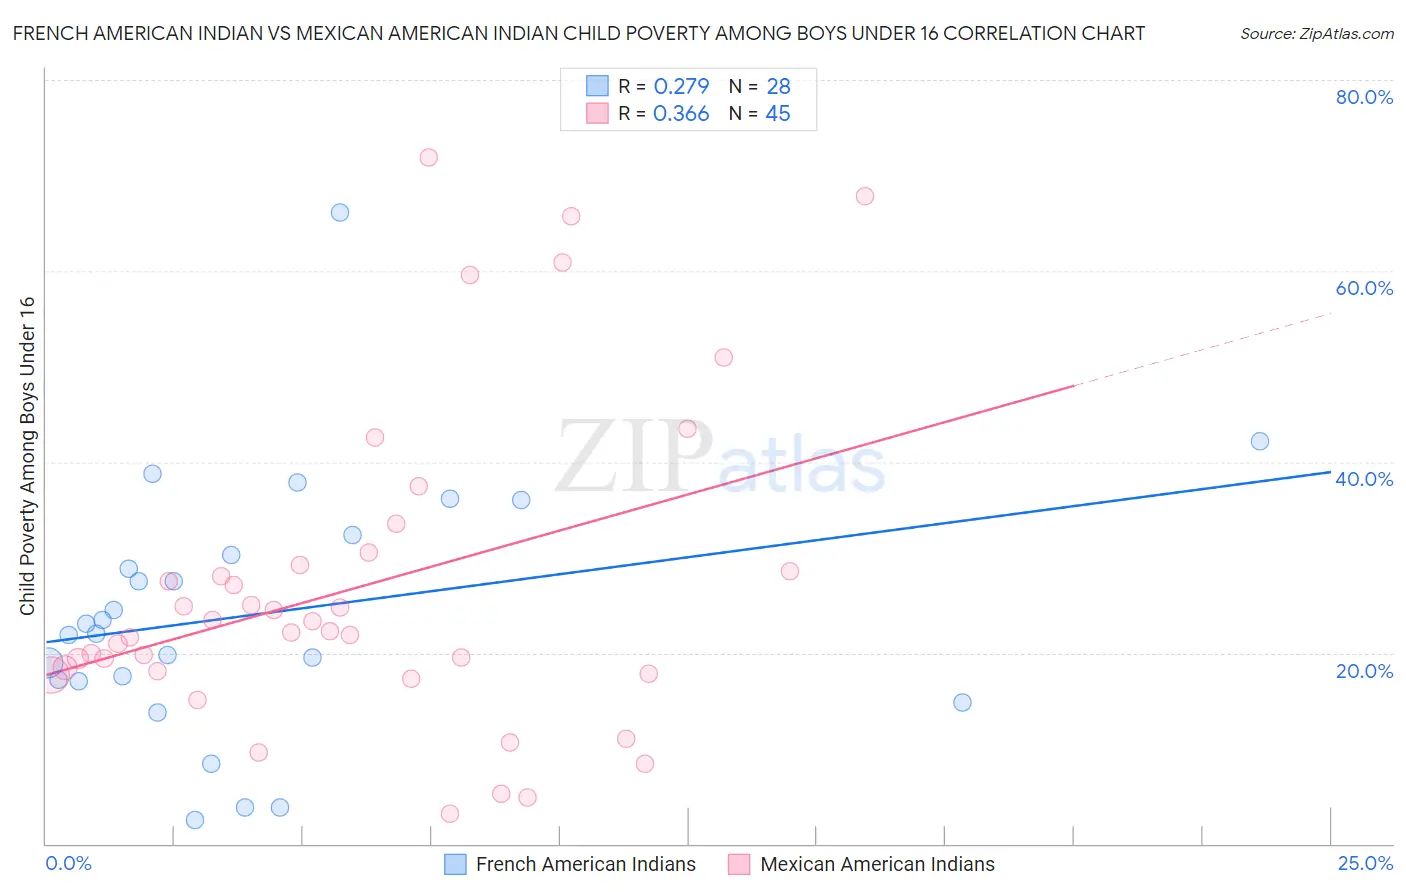 French American Indian vs Mexican American Indian Child Poverty Among Boys Under 16